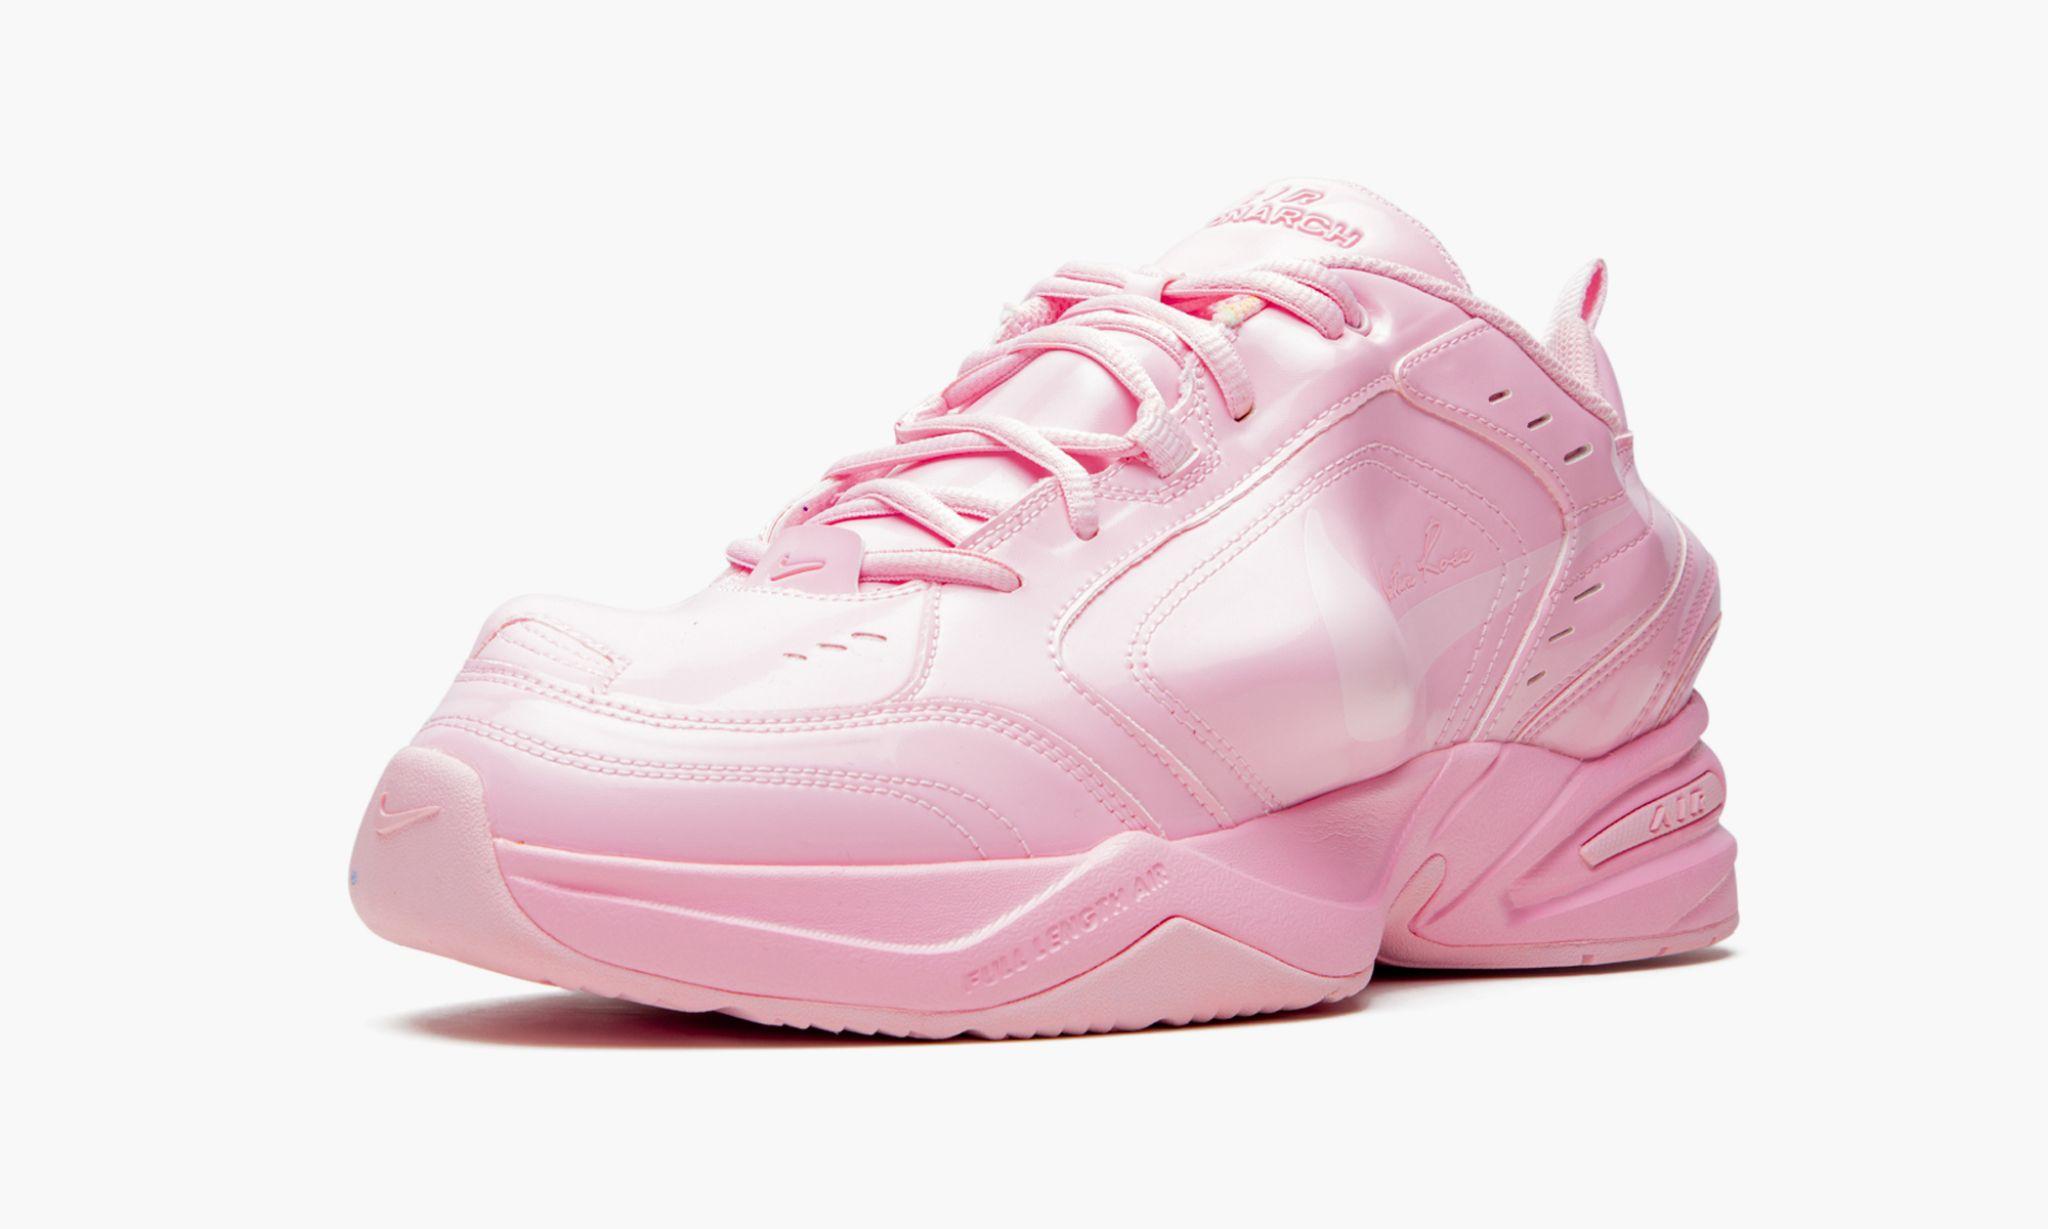 Nike X Martine Rose Air Monarch Iv Sneaker (unisex) in Pink for Men | Lyst